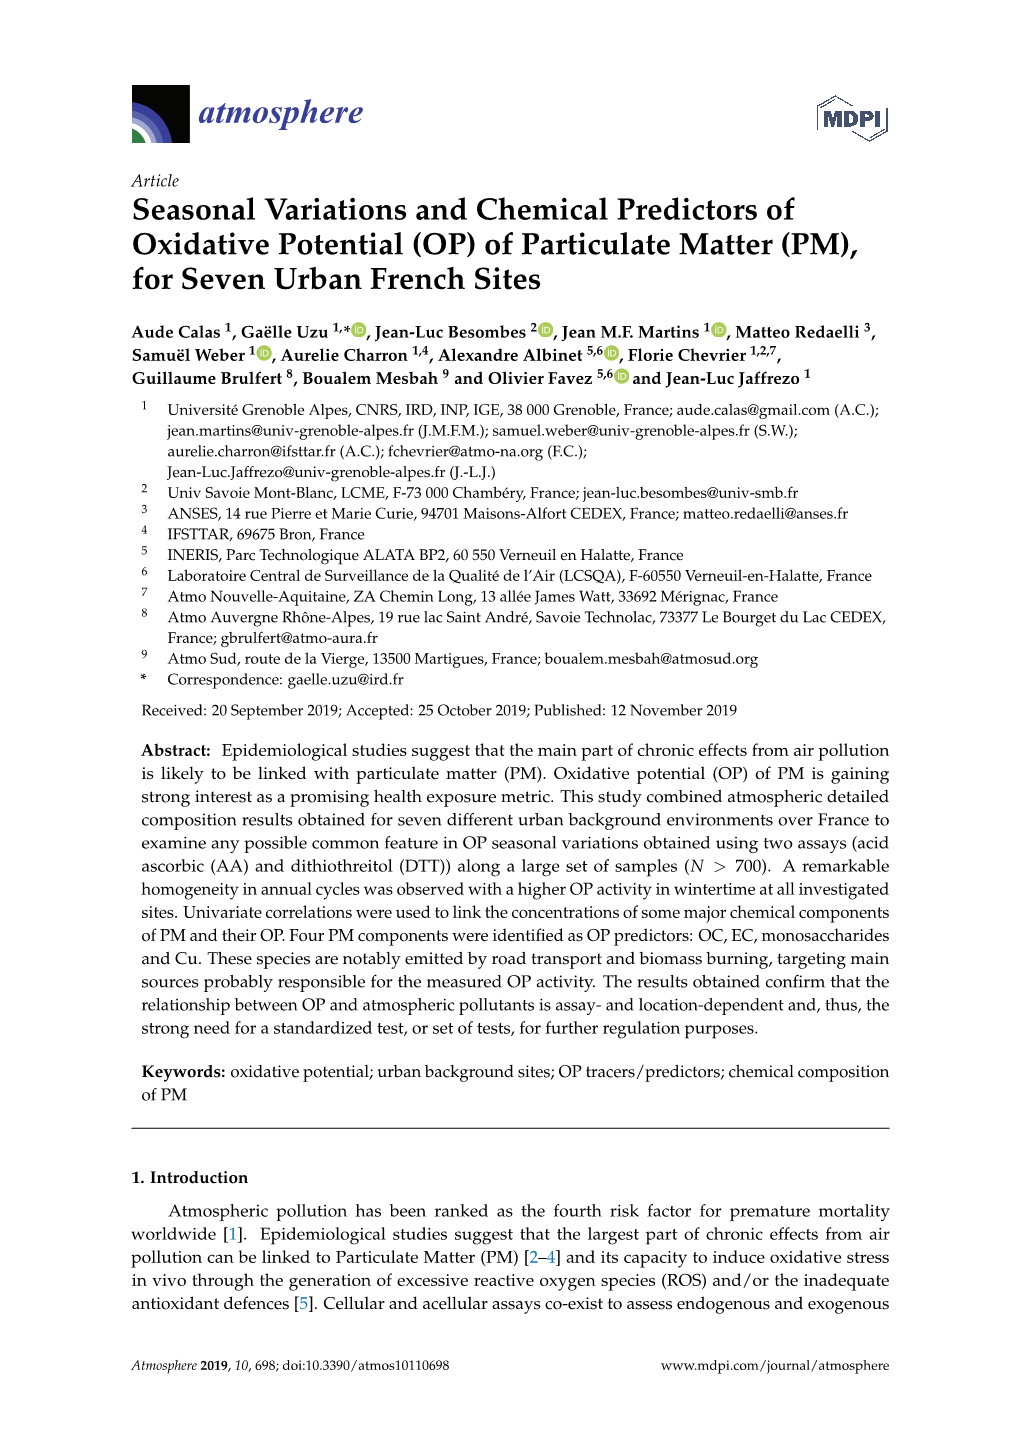 Of Particulate Matter (PM), for Seven Urban French Sites